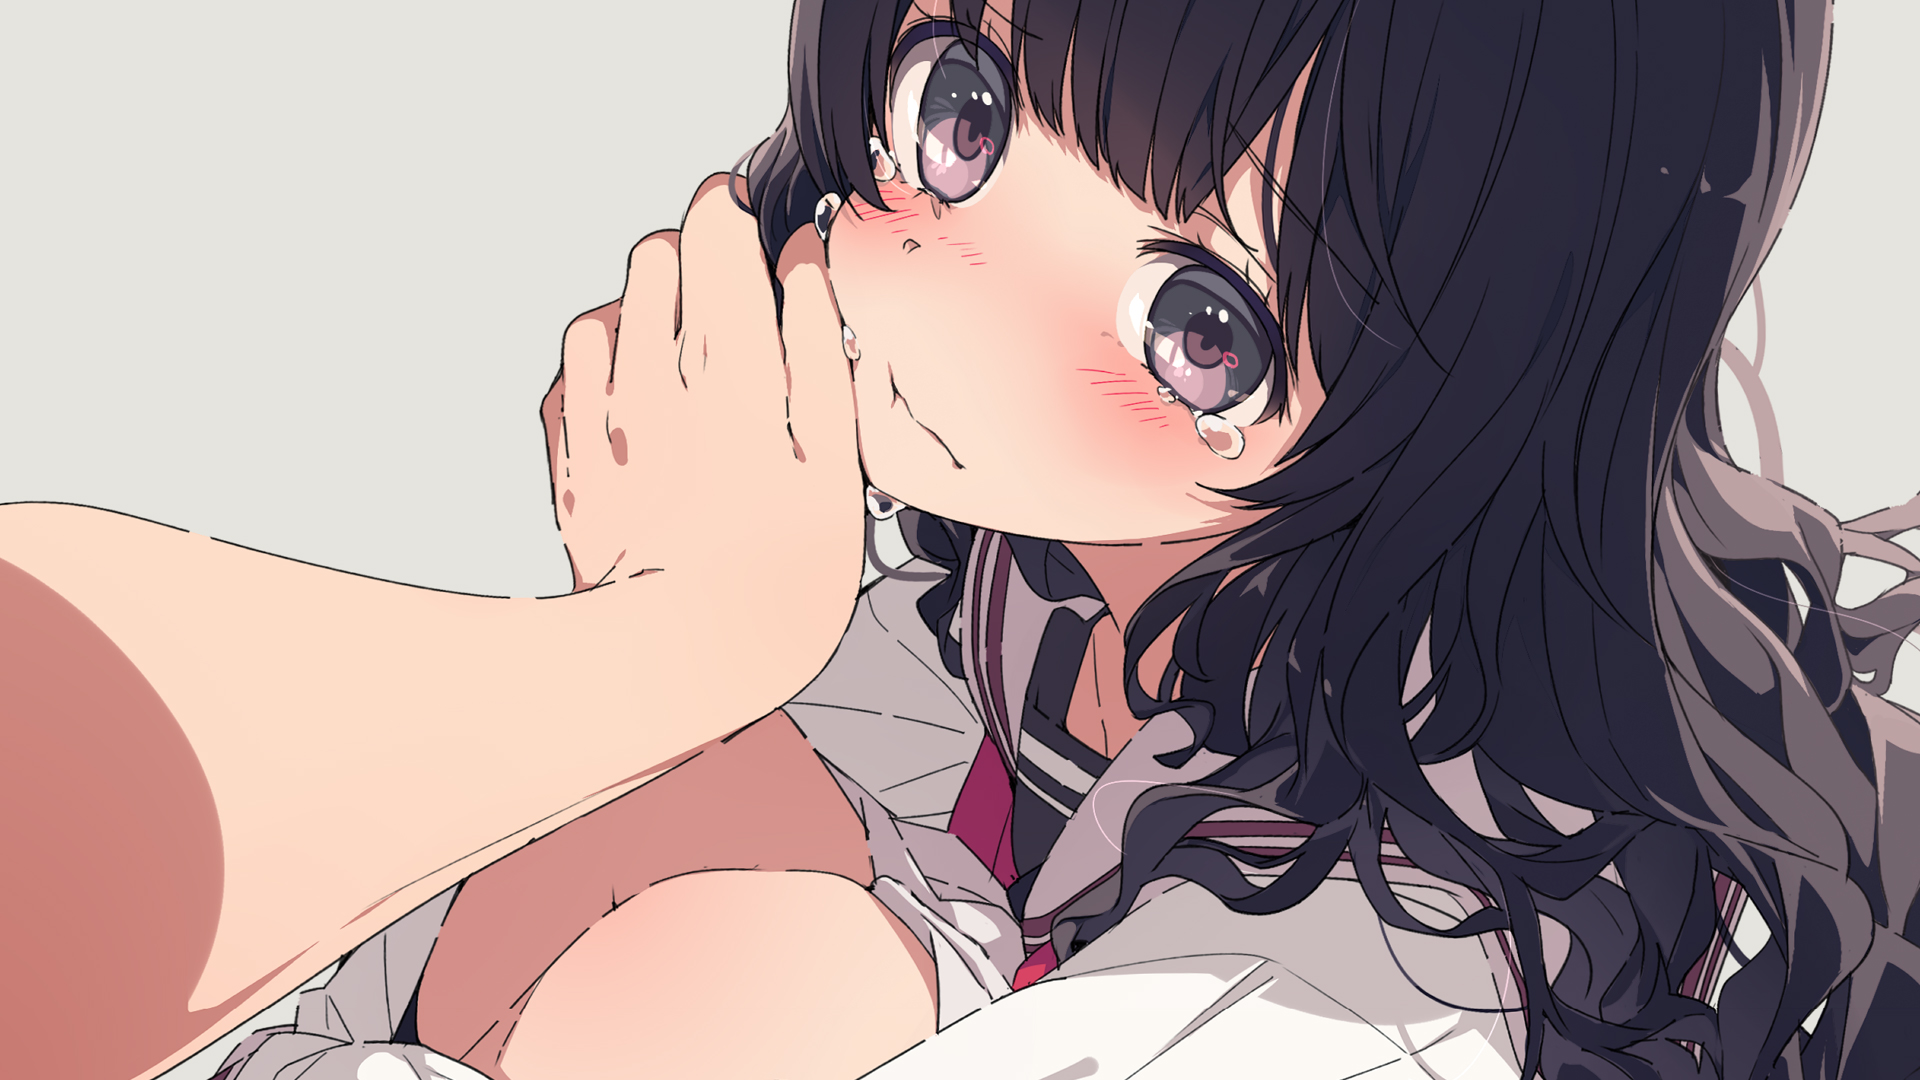 Anime 1920x1080 anime anime girls Ogipote touching face blushing closed mouth simple background tears looking at viewer long hair schoolgirl school uniform bent legs brunette hands face closeup